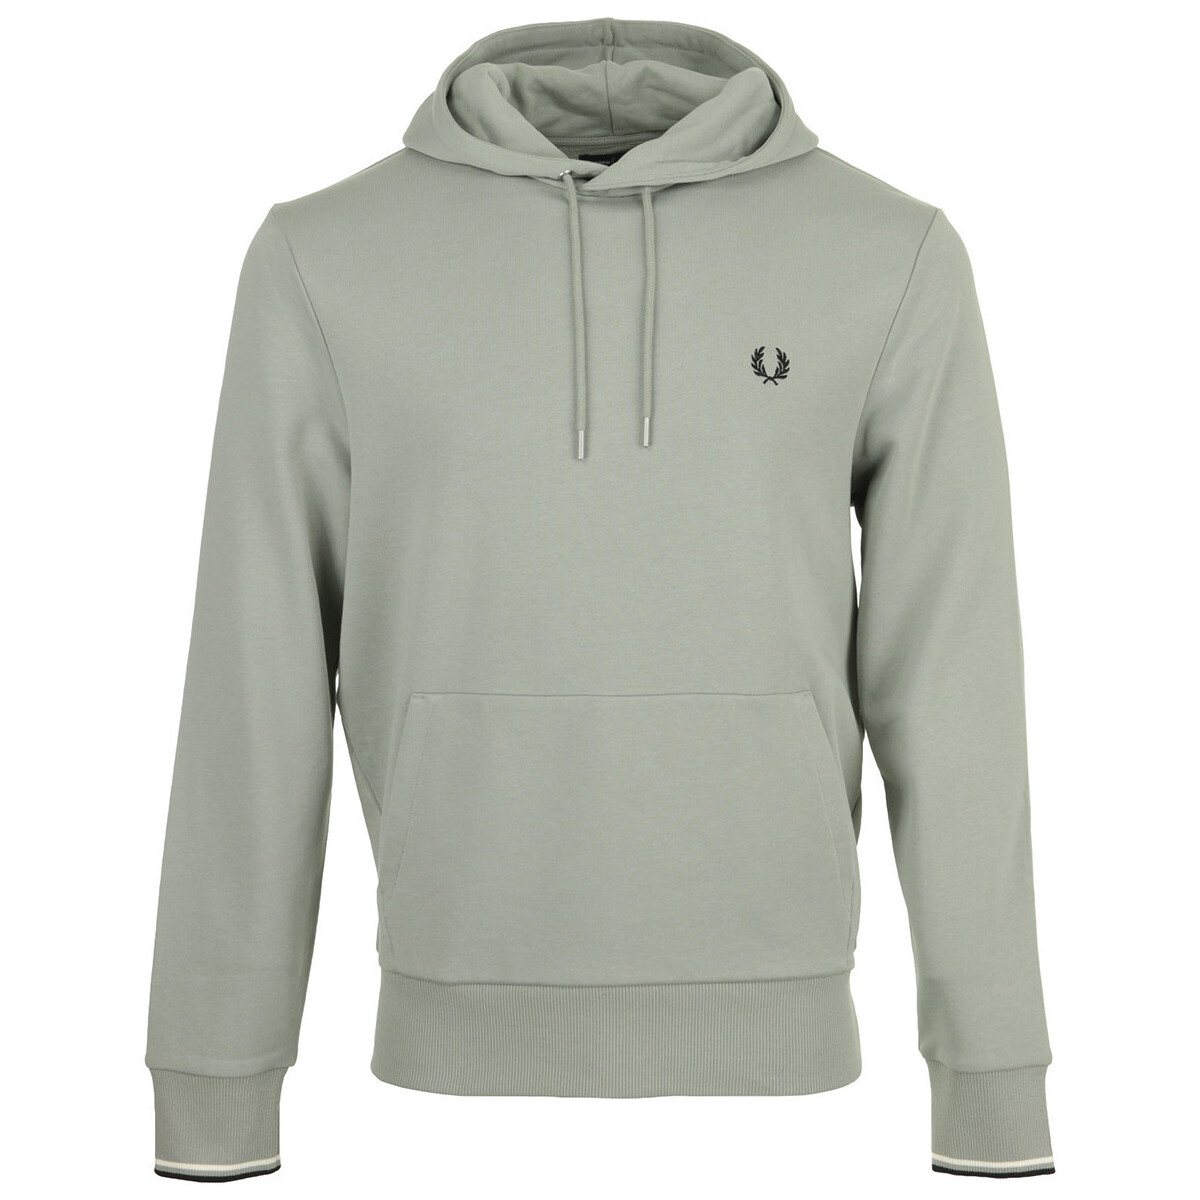 Levně Fred Perry Mikiny Tipped Hooded Sweatshirt Šedá